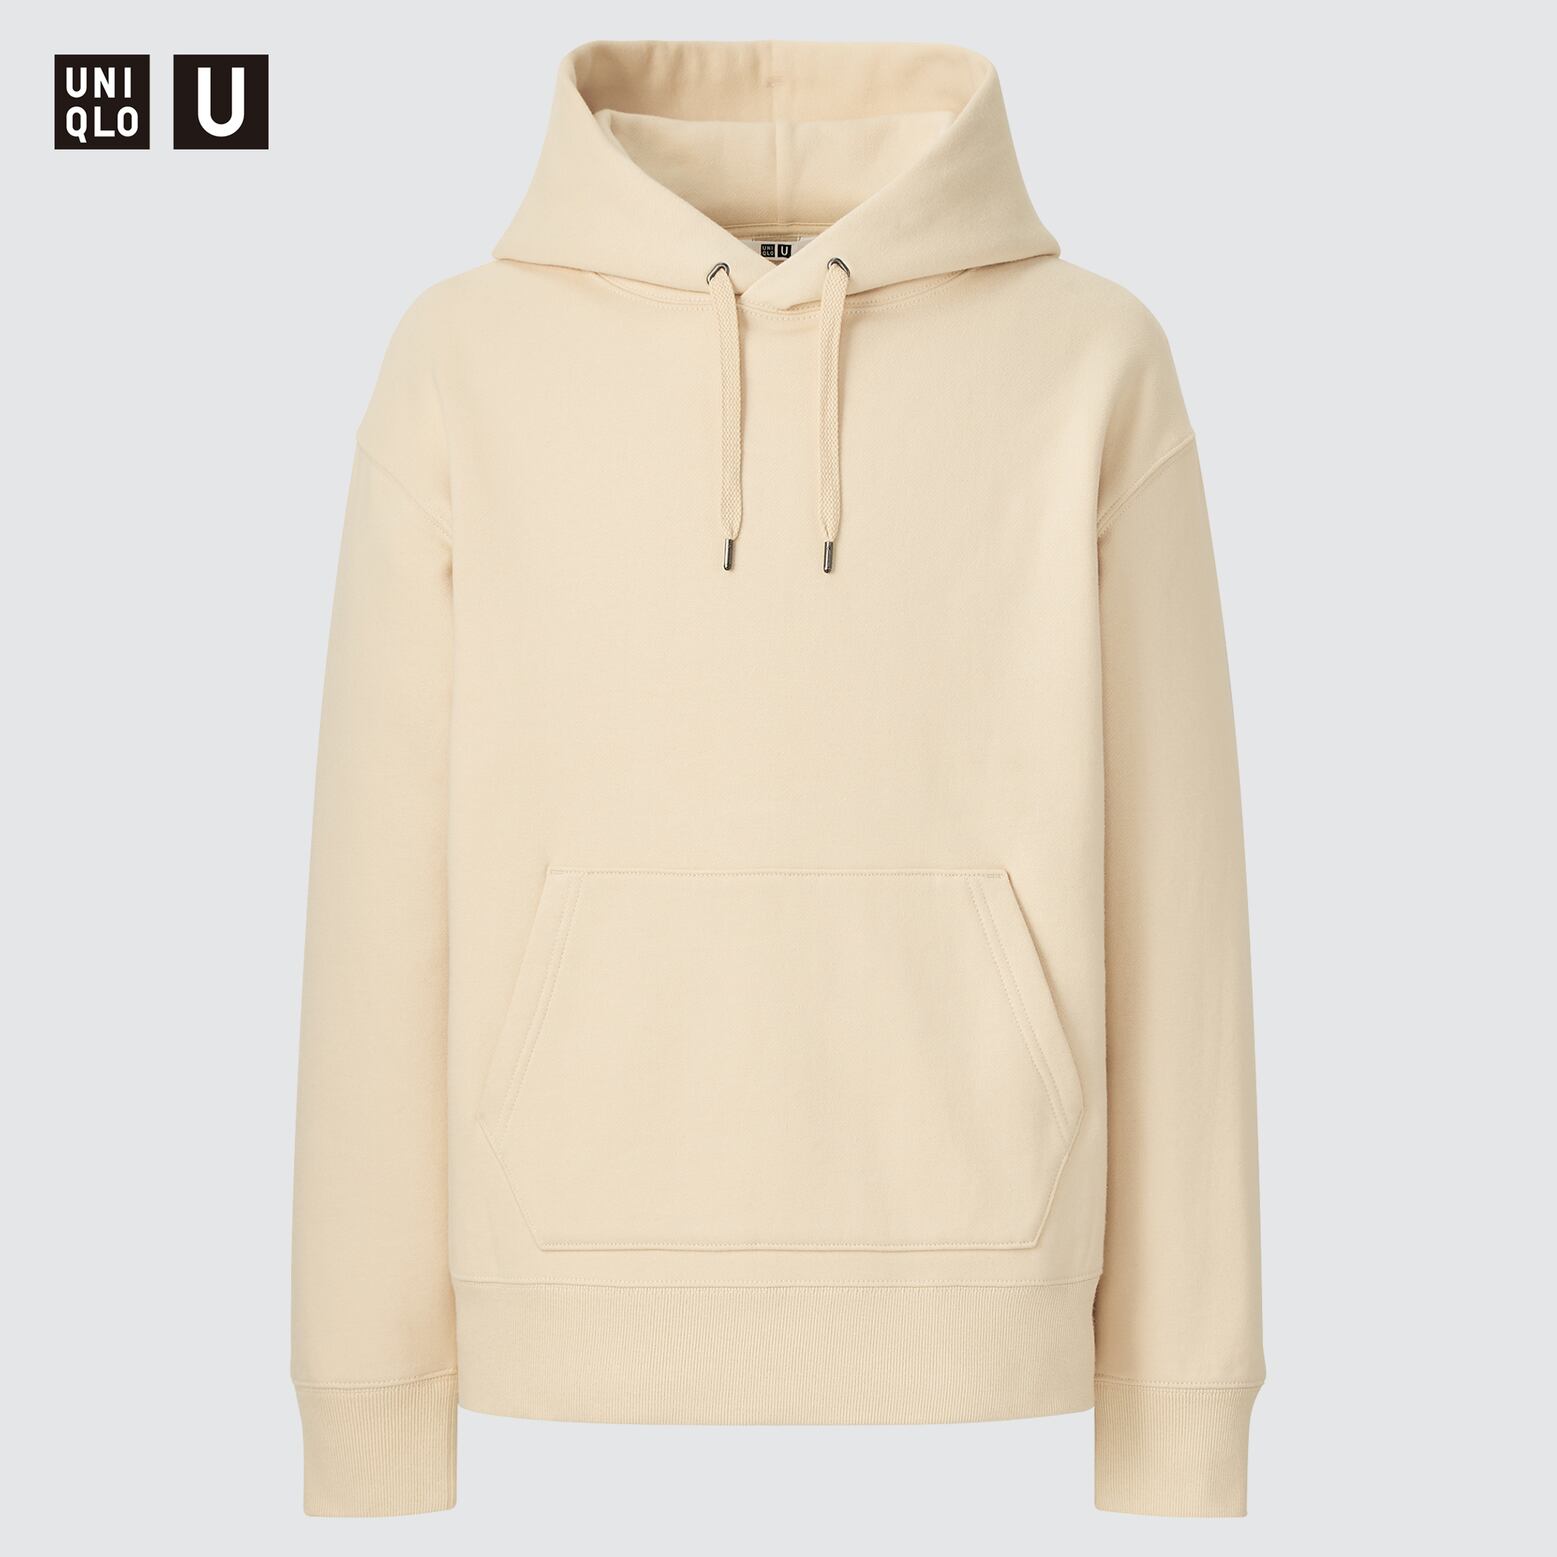 Check Styling Ideas For「Ultra Stretch Dry Sweat Pullover, 56% OFF